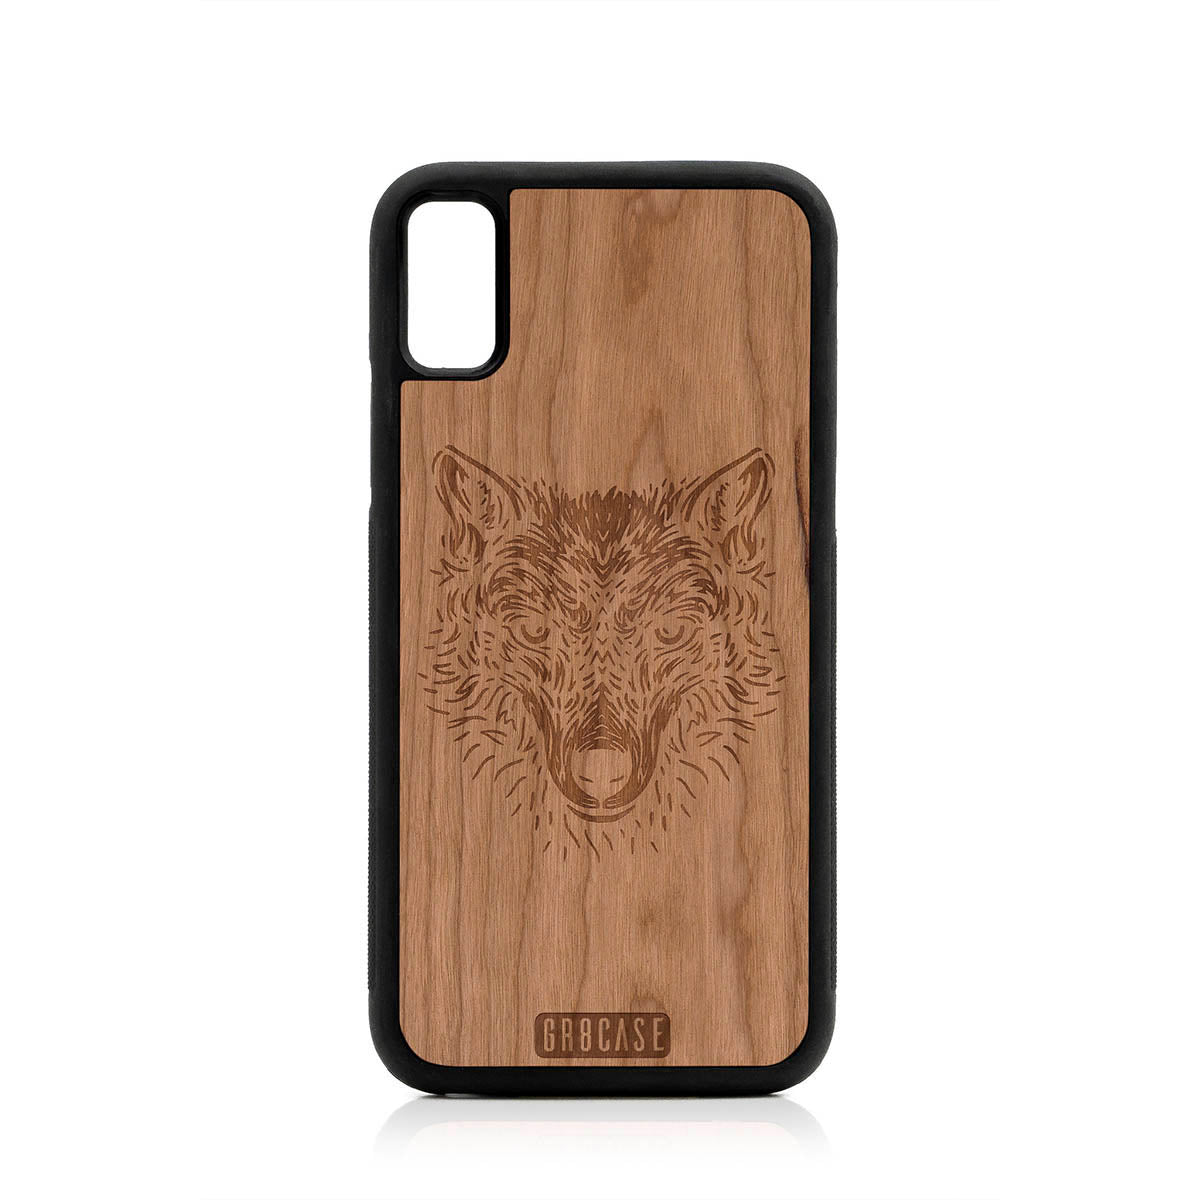 Furry Wolf Design Wood Case For iPhone XS Max